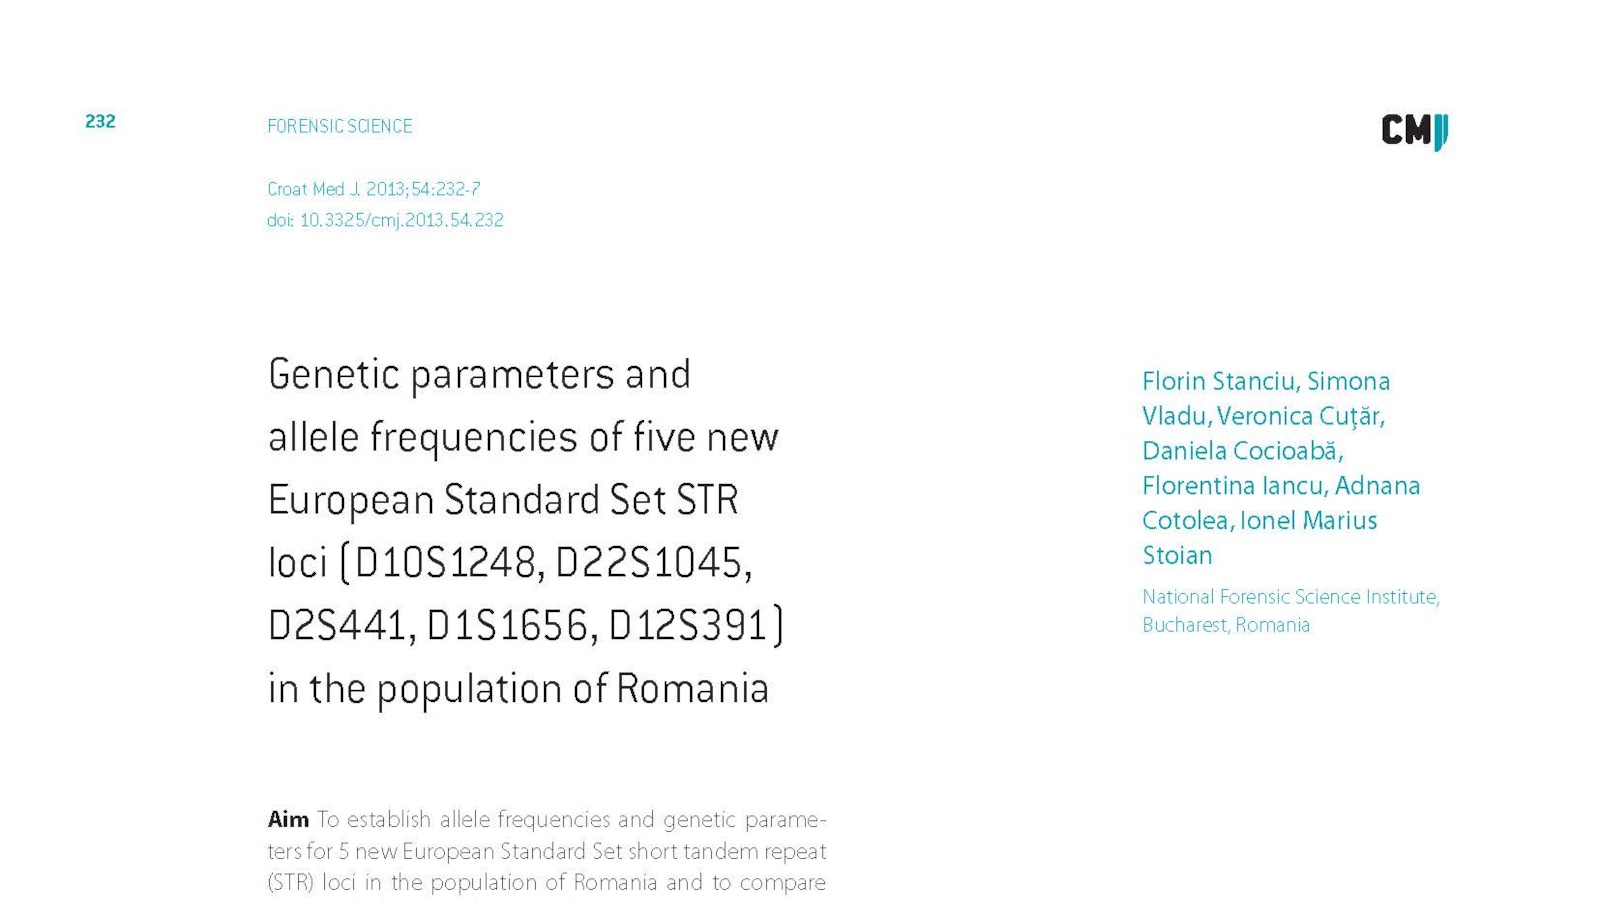 2013 - Genetic parameters and allele frequencies of five new European Standard Set STR in the population of Romania